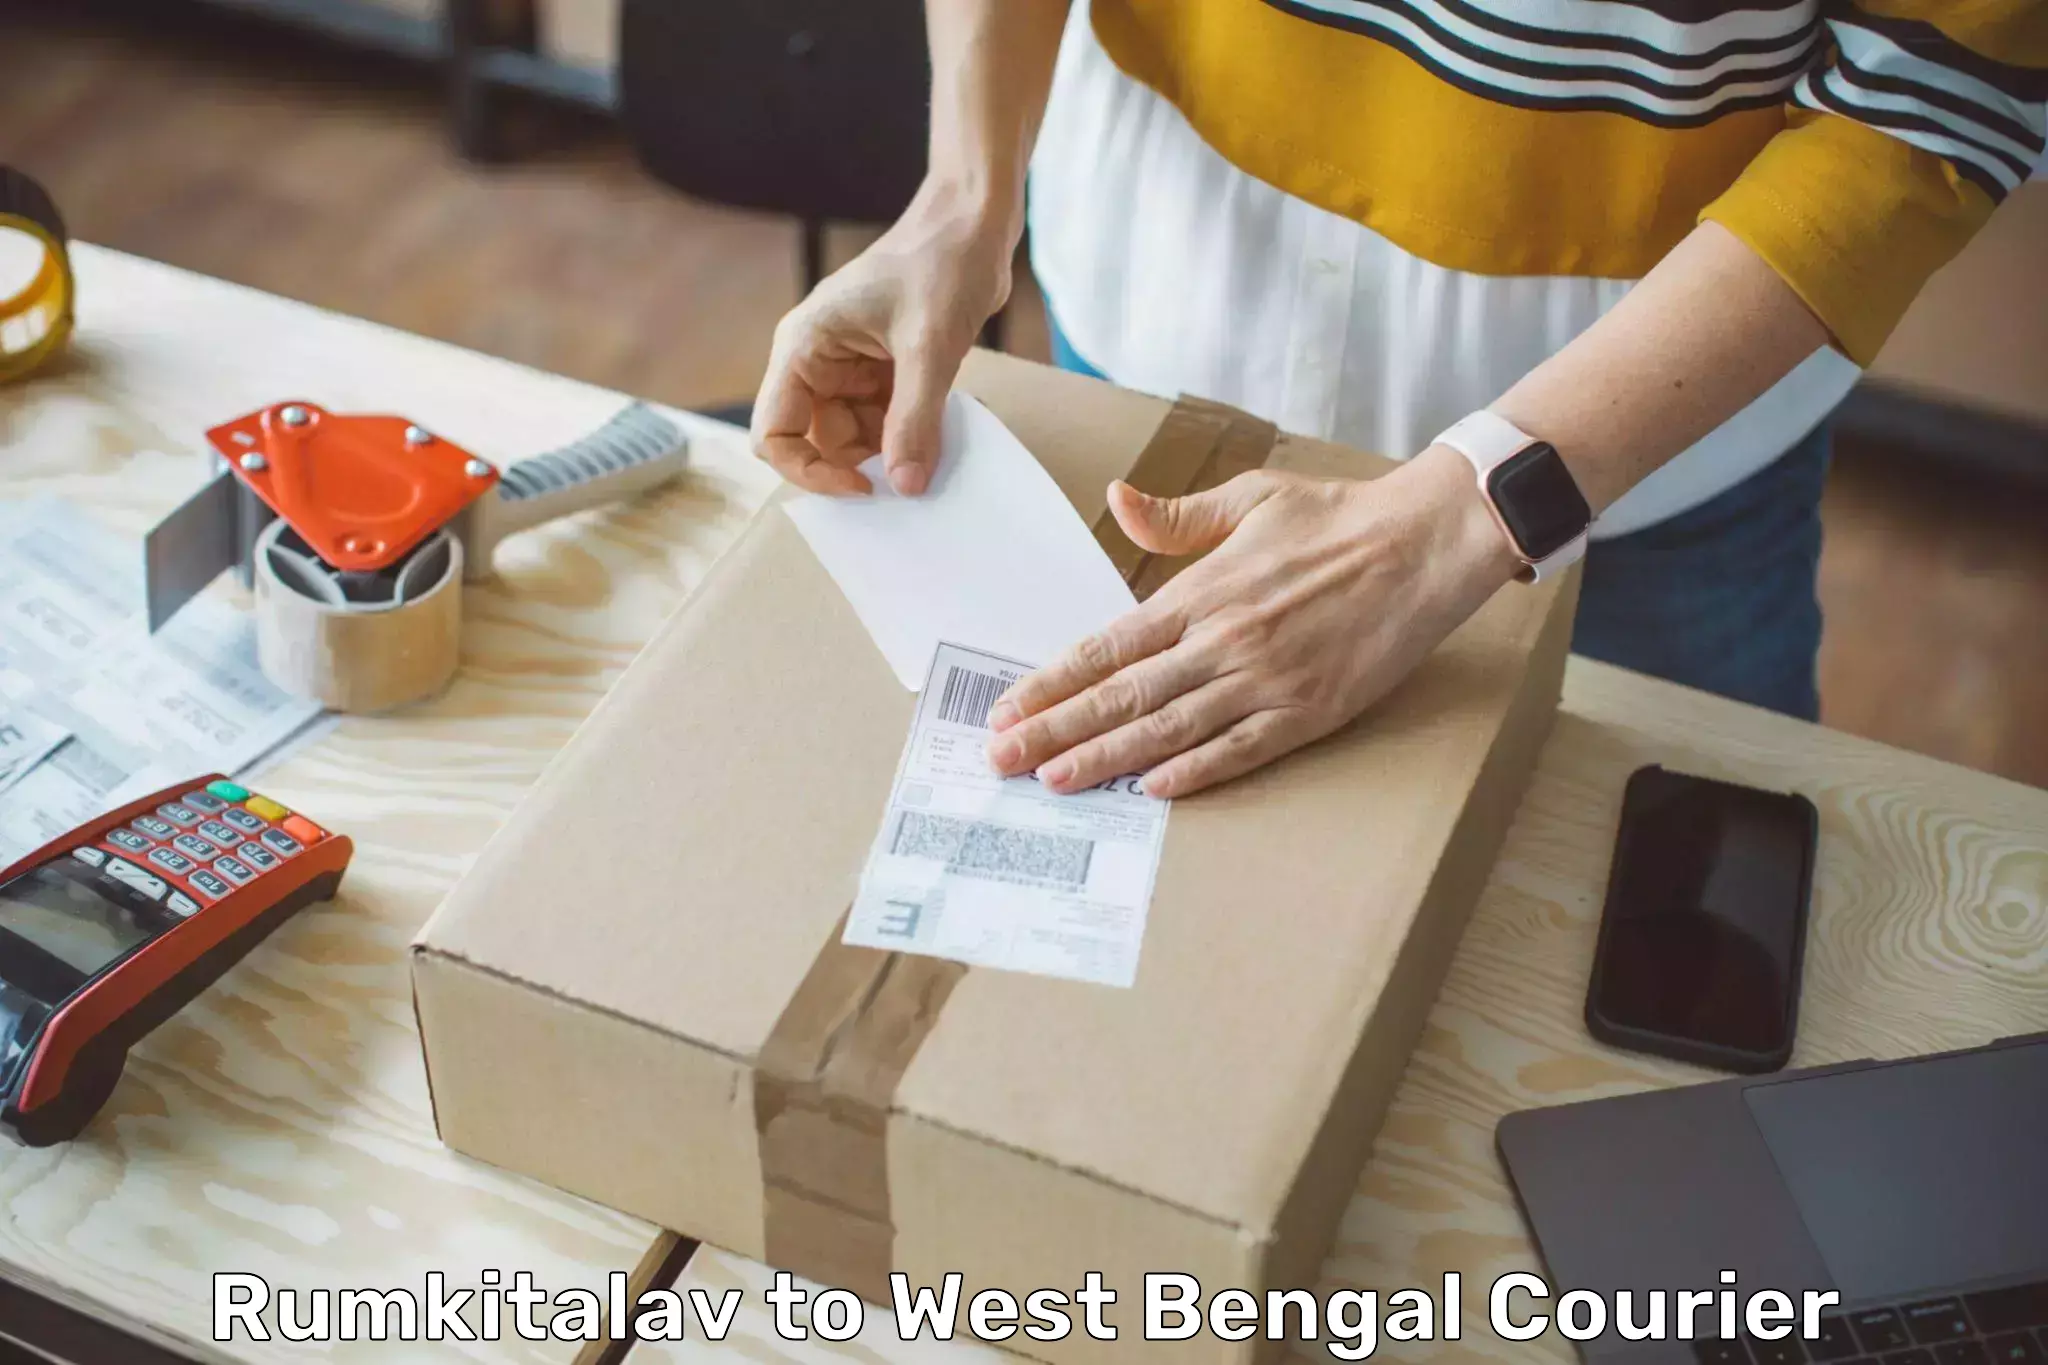 Courier service comparison Rumkitalav to West Bengal